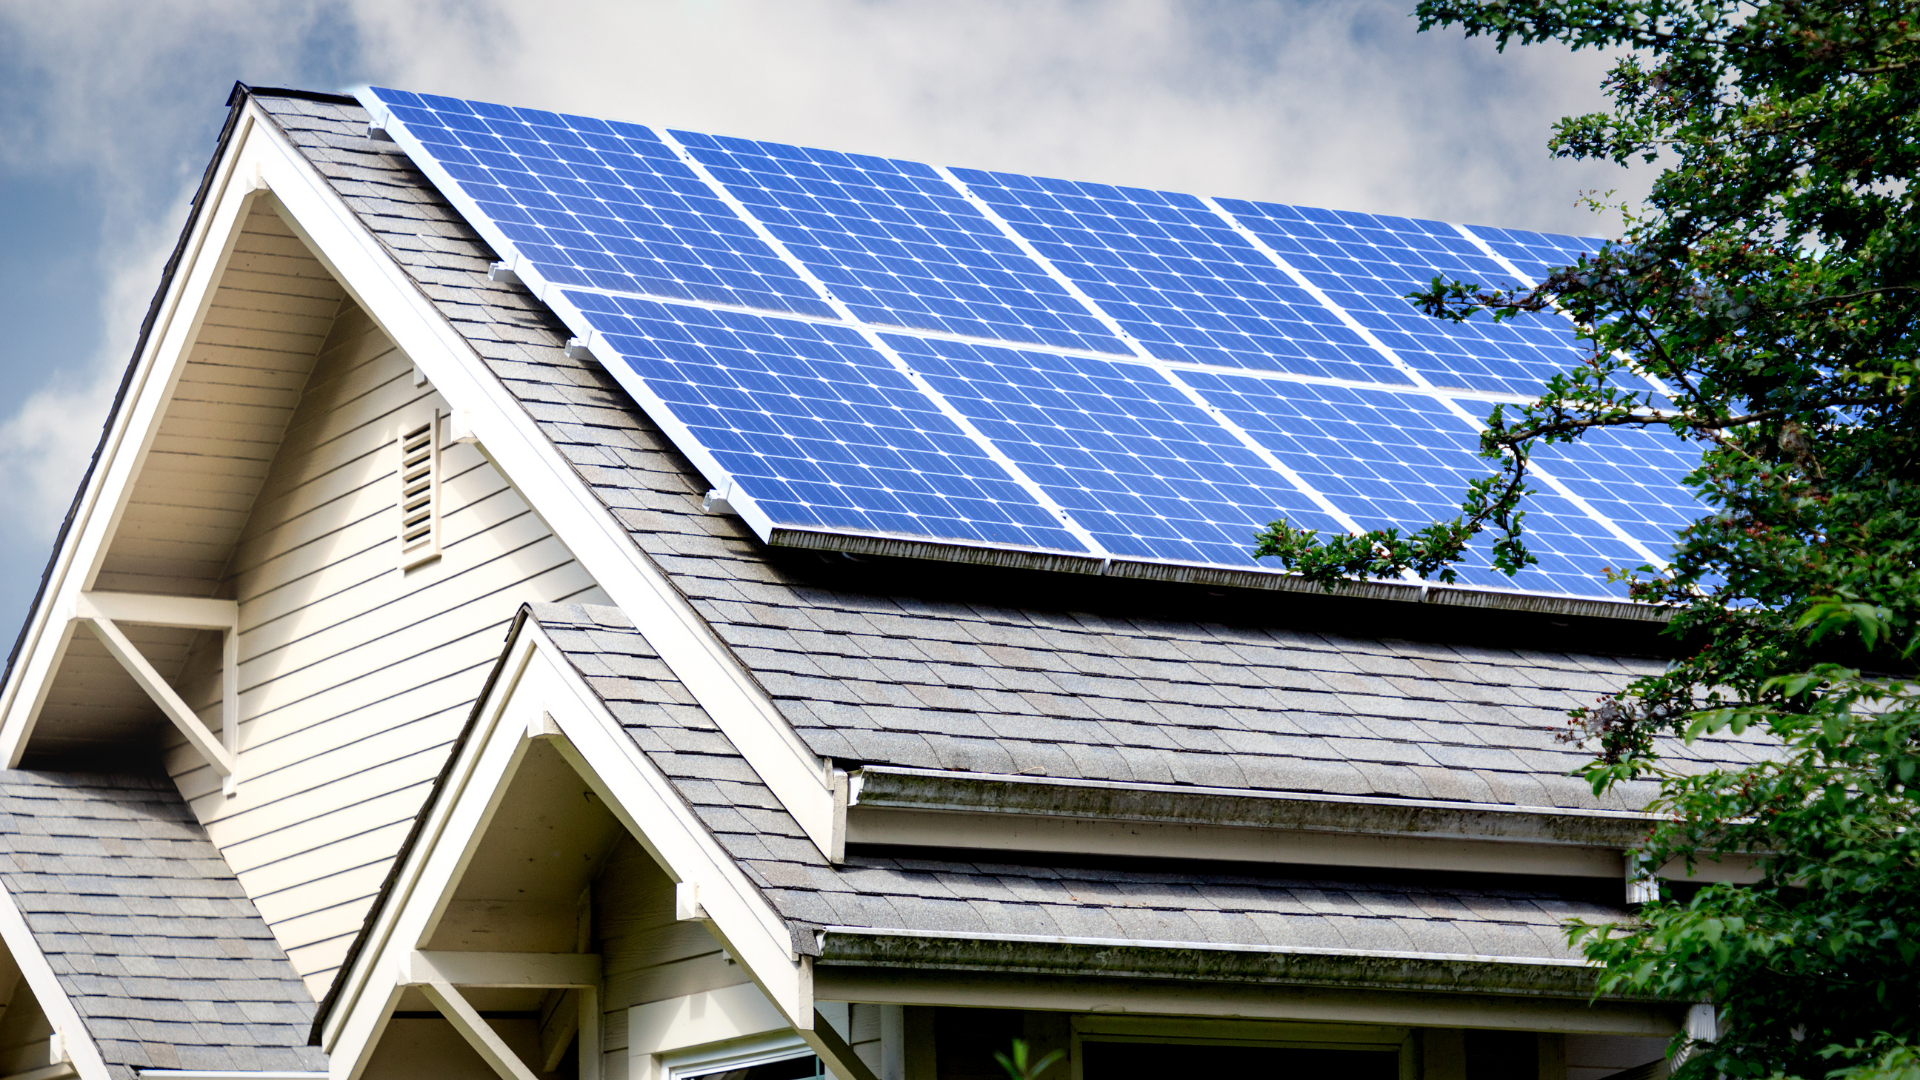 Blue vs. Black Solar Panels: What’s the Difference?